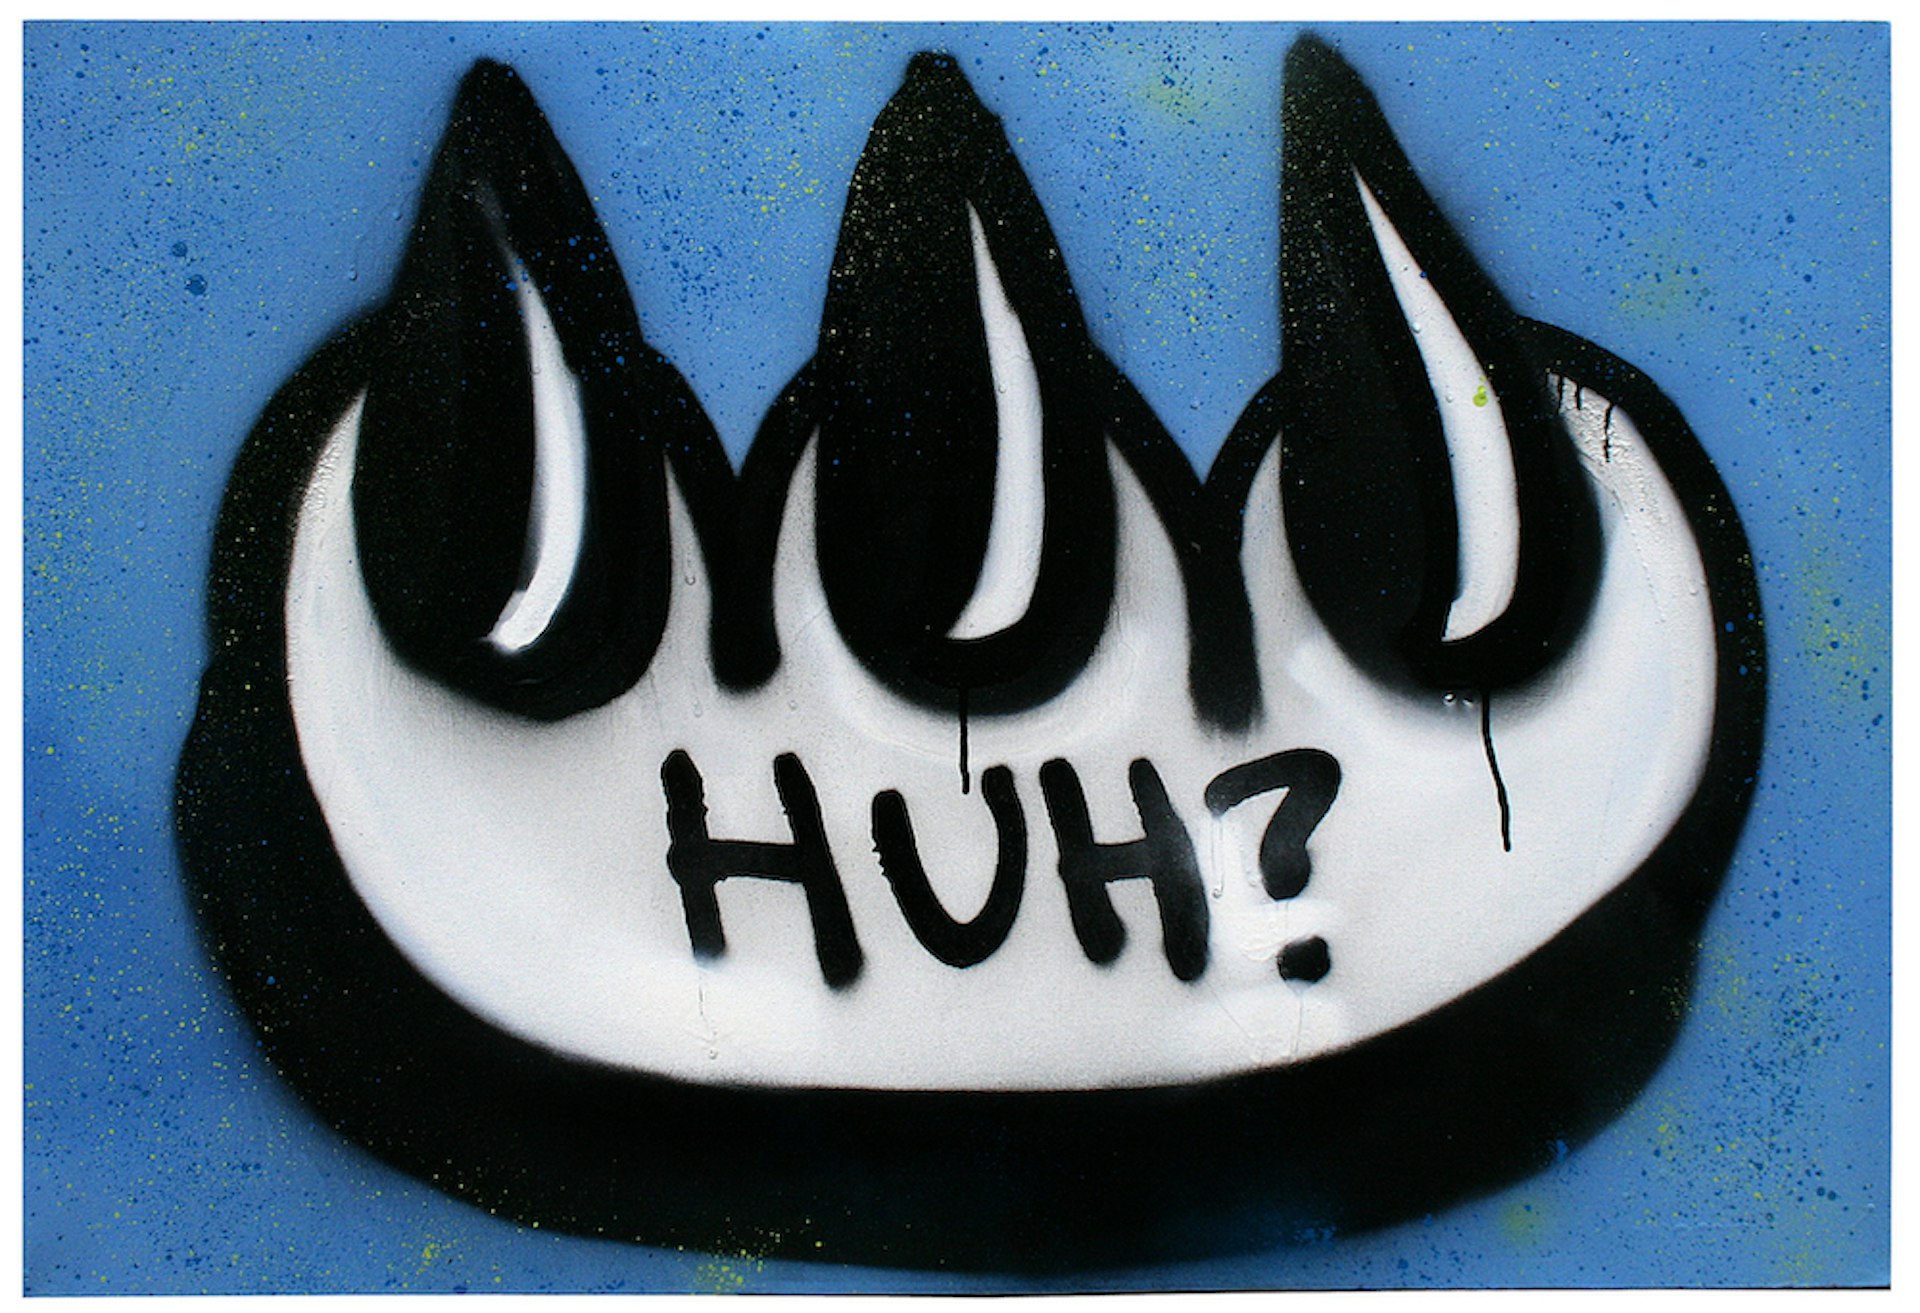 A graffiti tag of a claw with "huh?" written inside